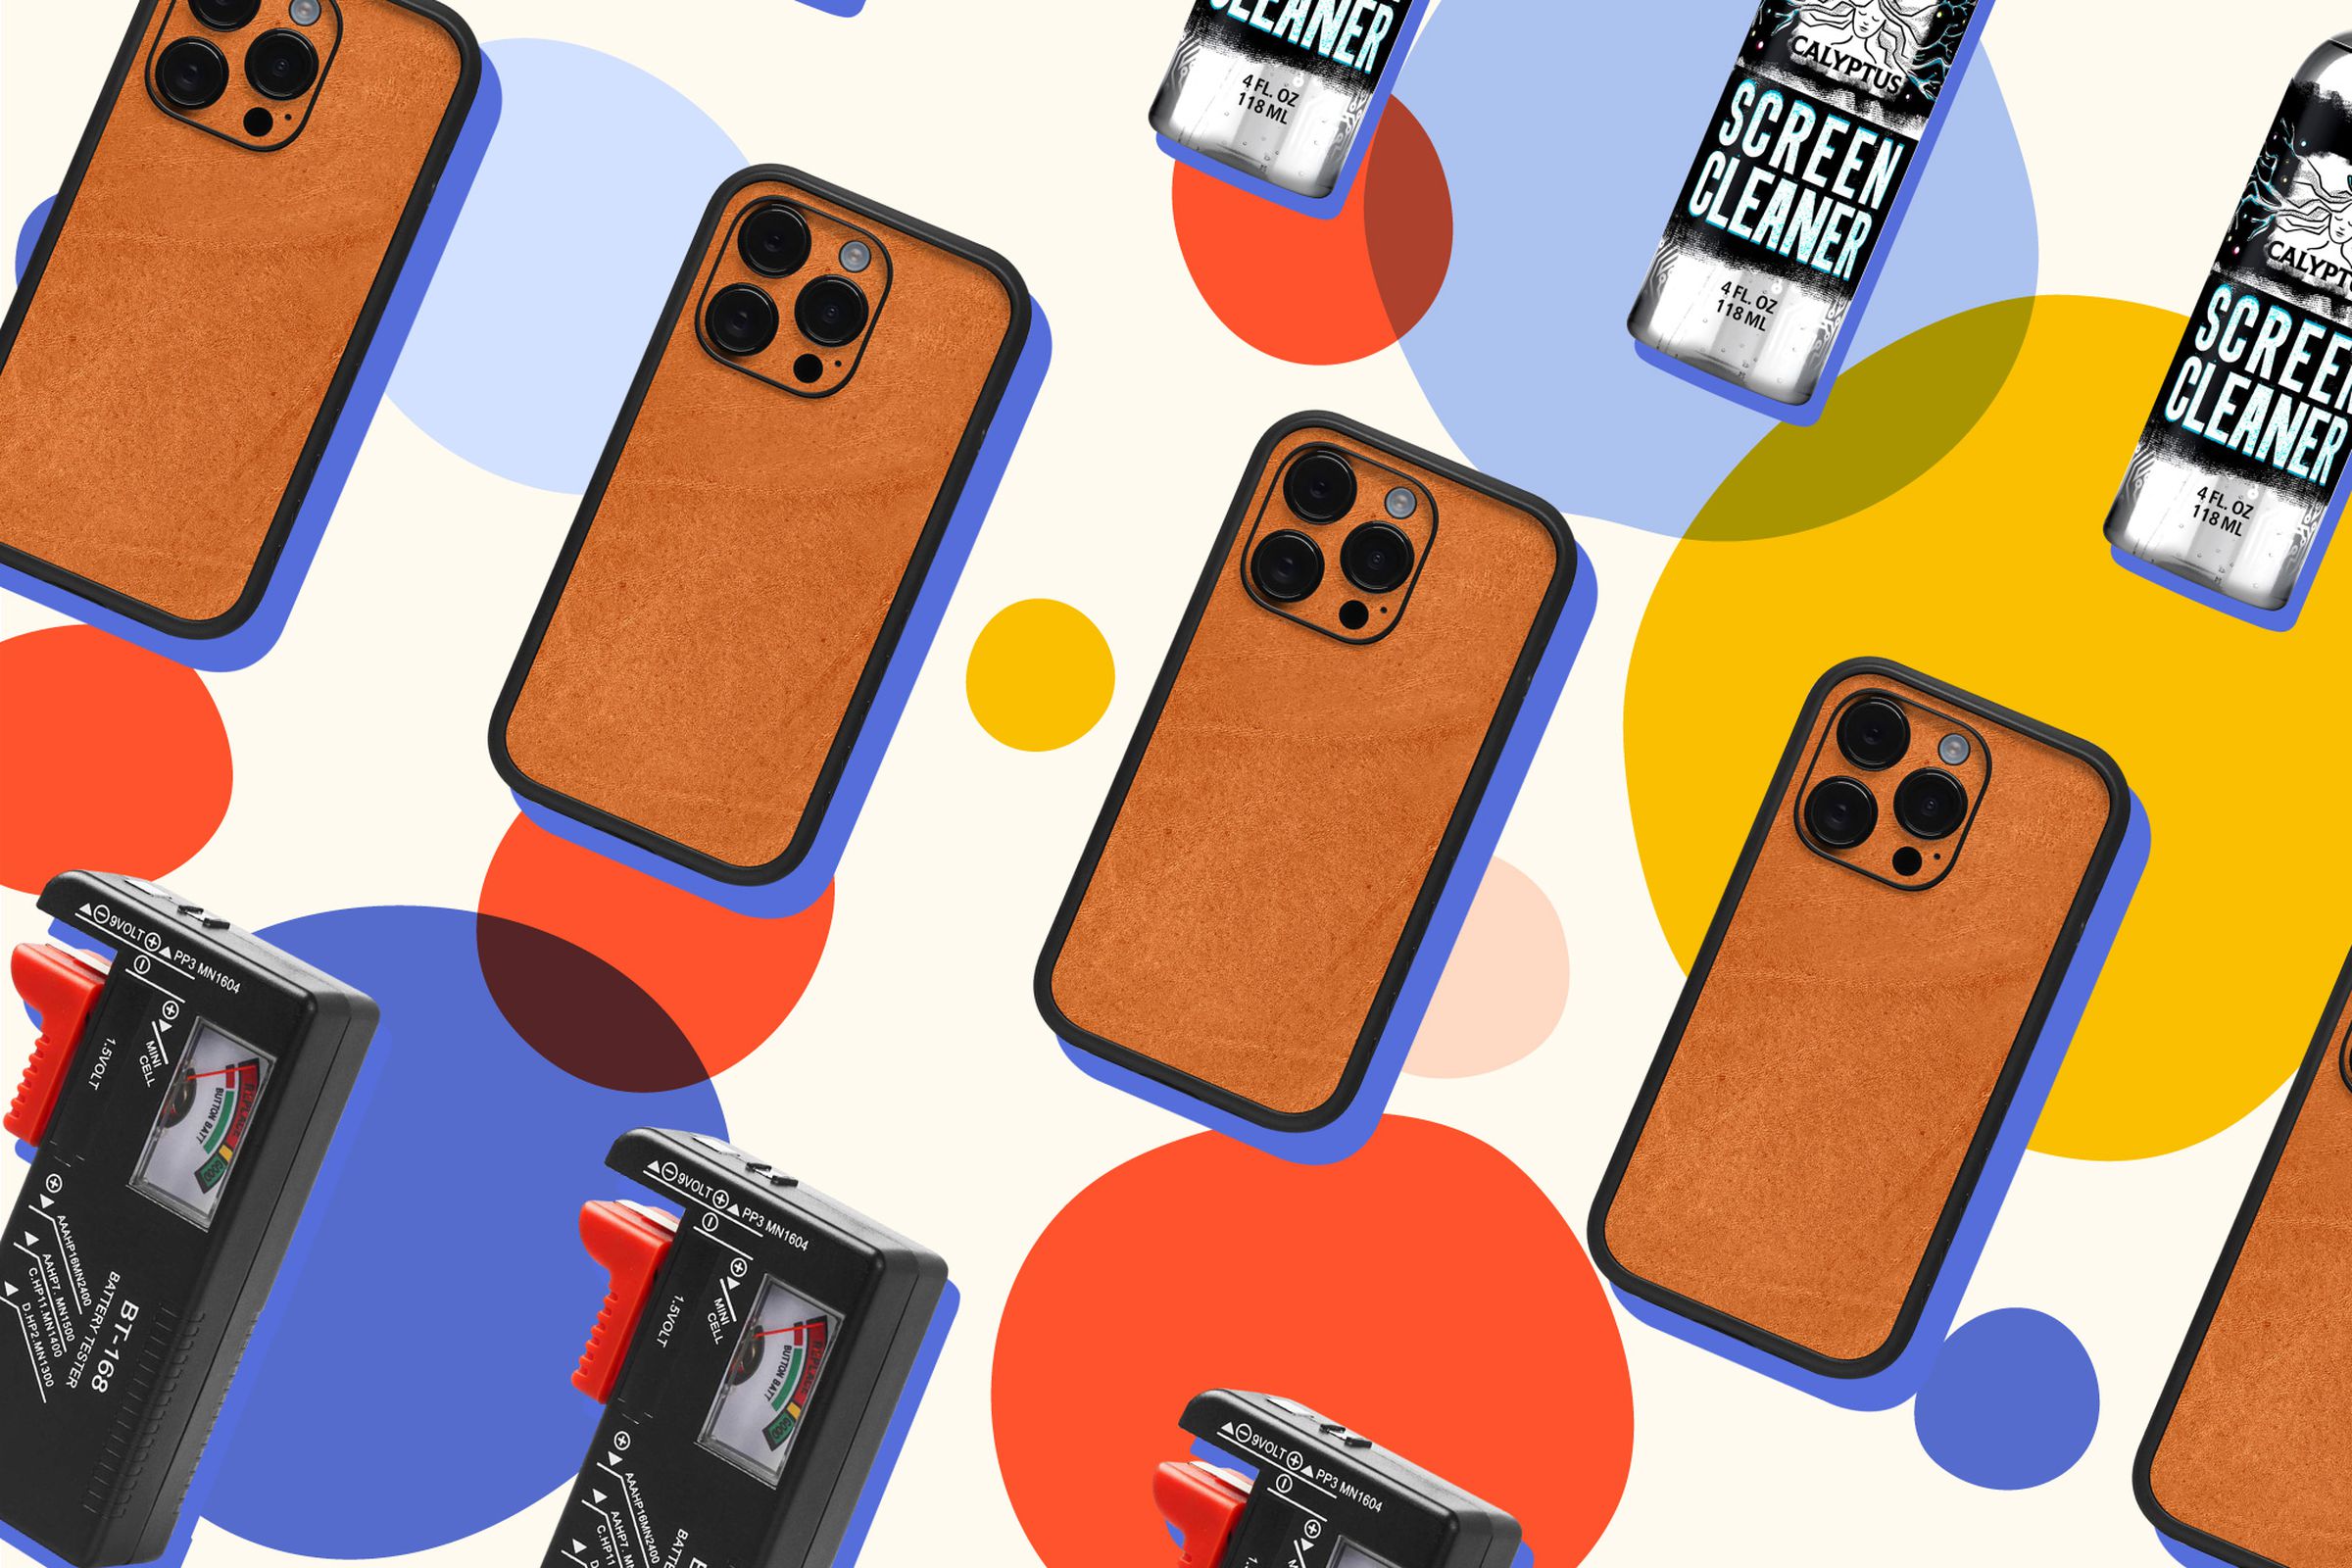 Colorful illustration showing an iPhone with a leather Dbrand skin, battery voltage checker, and screen cleaning spray.